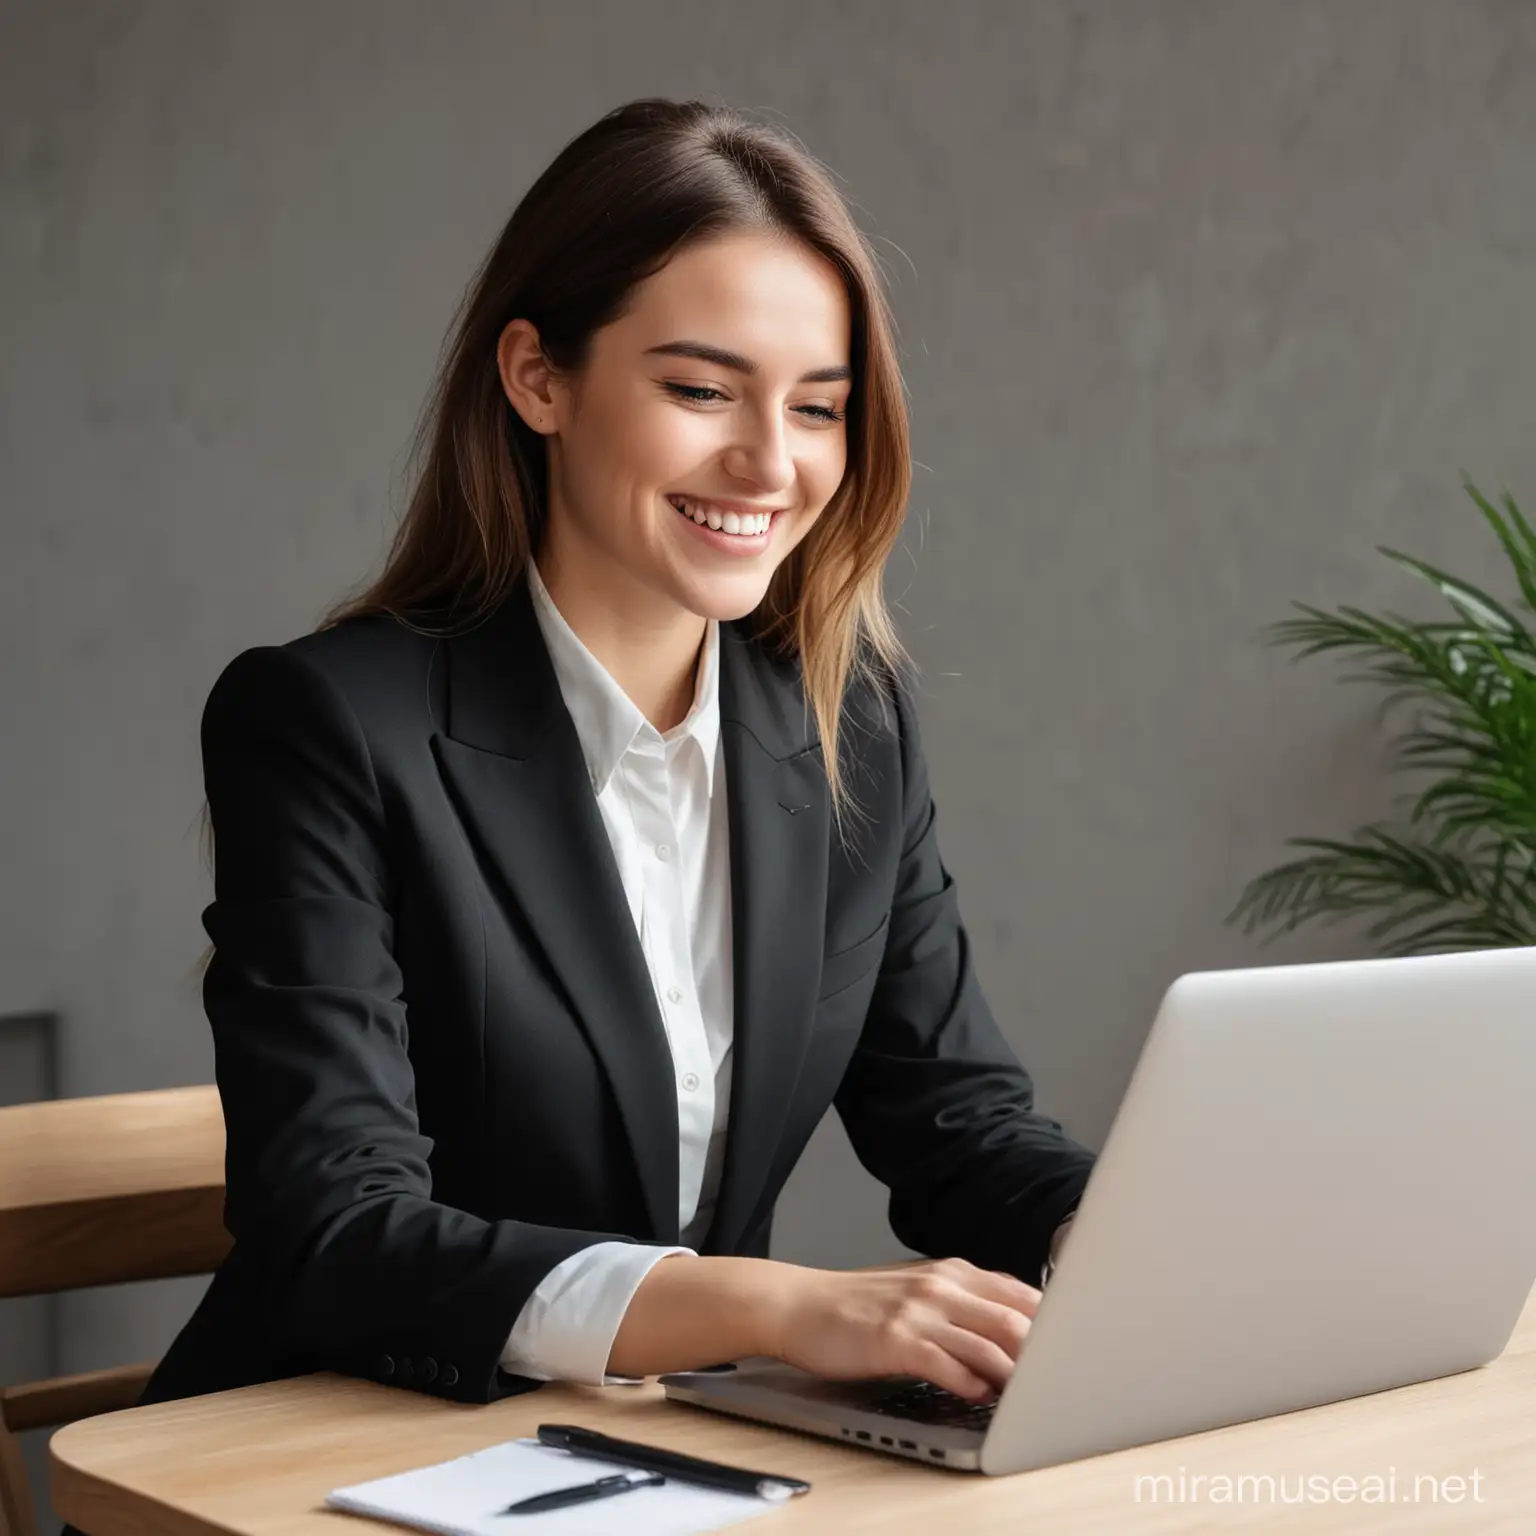 Professional Woman in Black Suit Working on Laptop